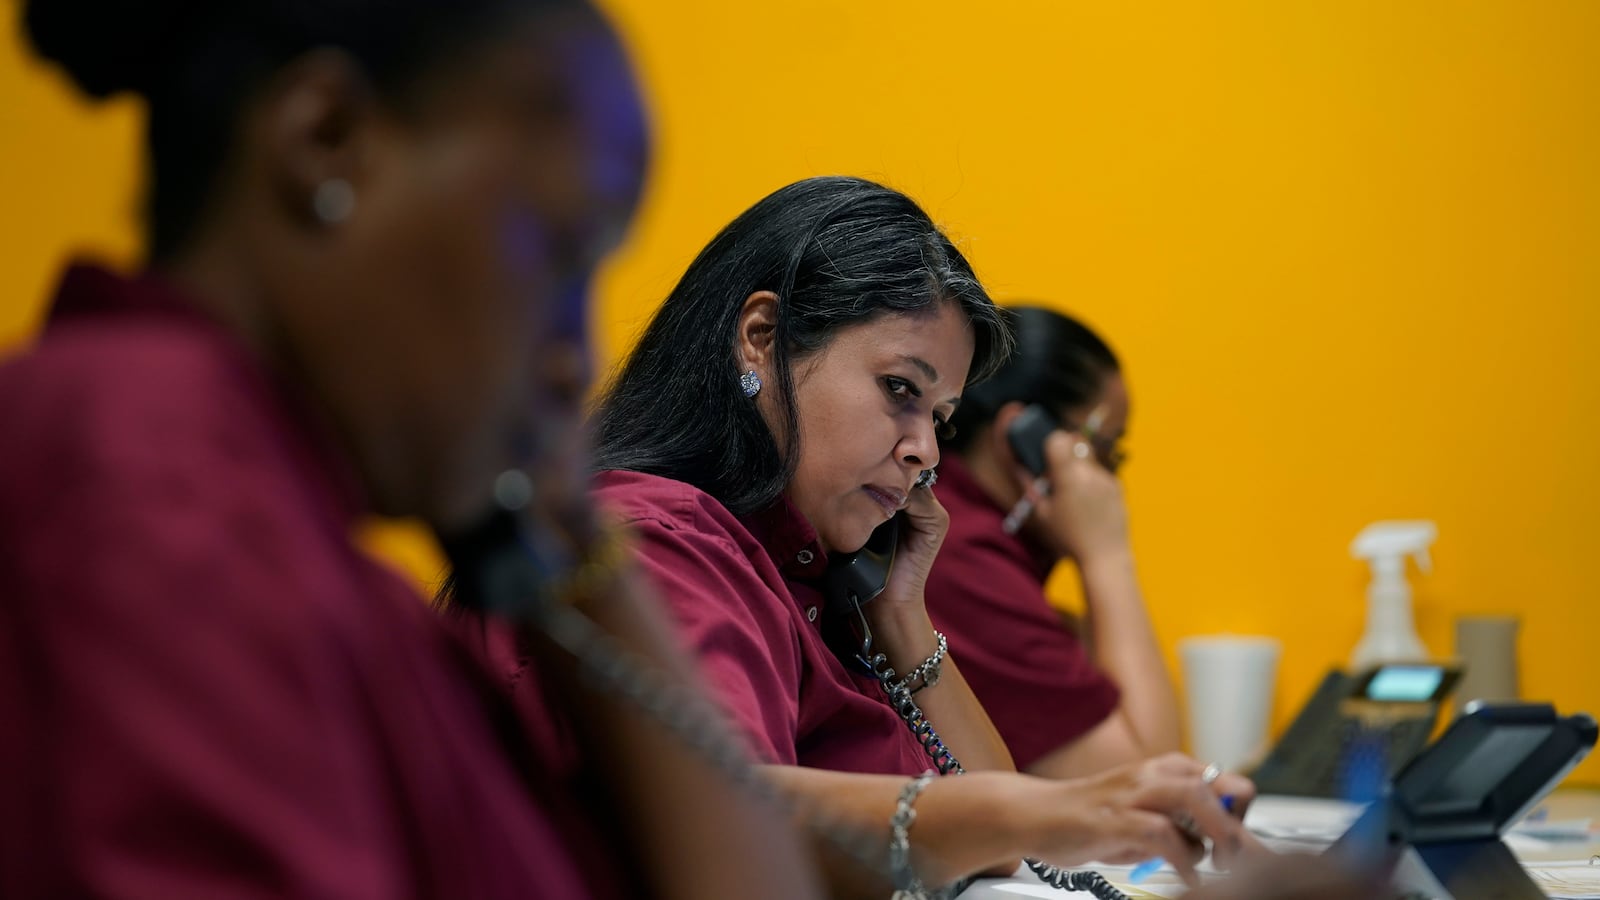 Three women wearing dark red shirts work on the phone in a call center. The woman in the center is the focal point, who appears to be typing as she is on the telephone.